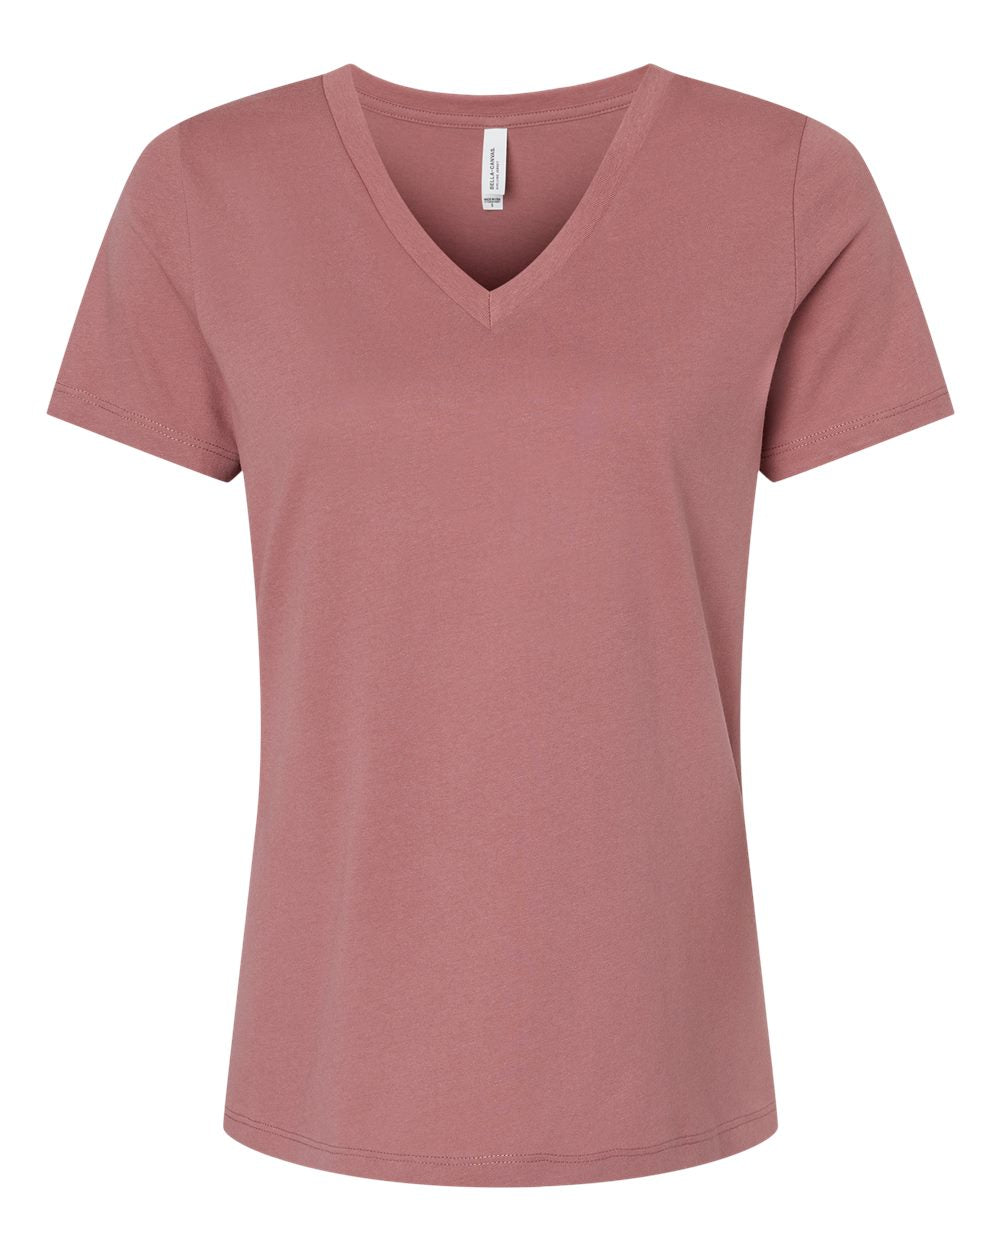 Bella + Canvas Women's Relaxed V-Neck Tee (6405) in Mauve